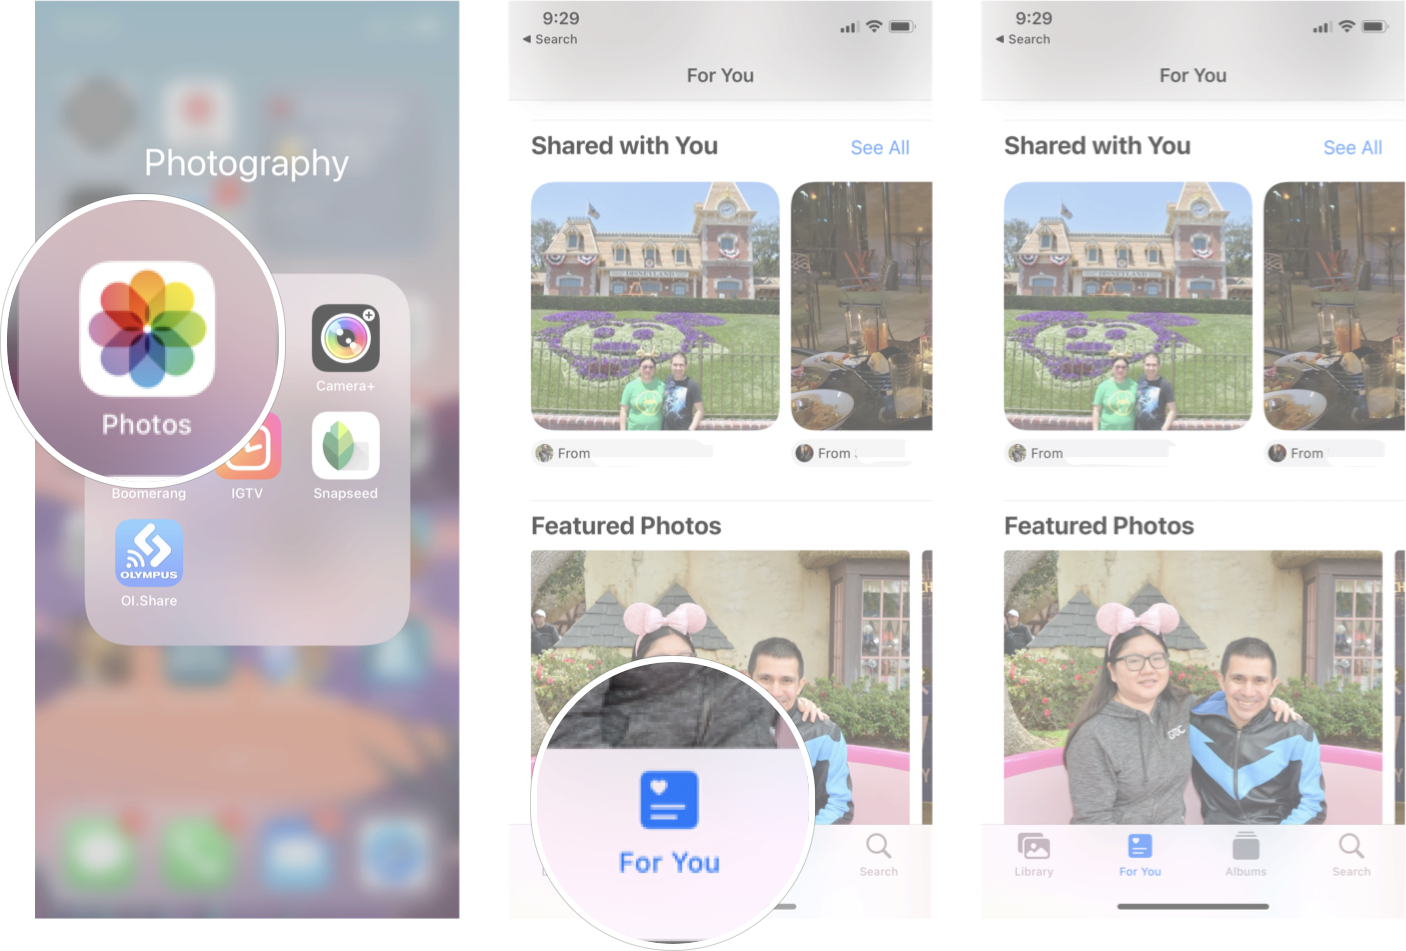 How To View Shared With You Content In Photos iOS 15: Launch Photos, tap the For You tab and the scroll down to the Shared With You section.